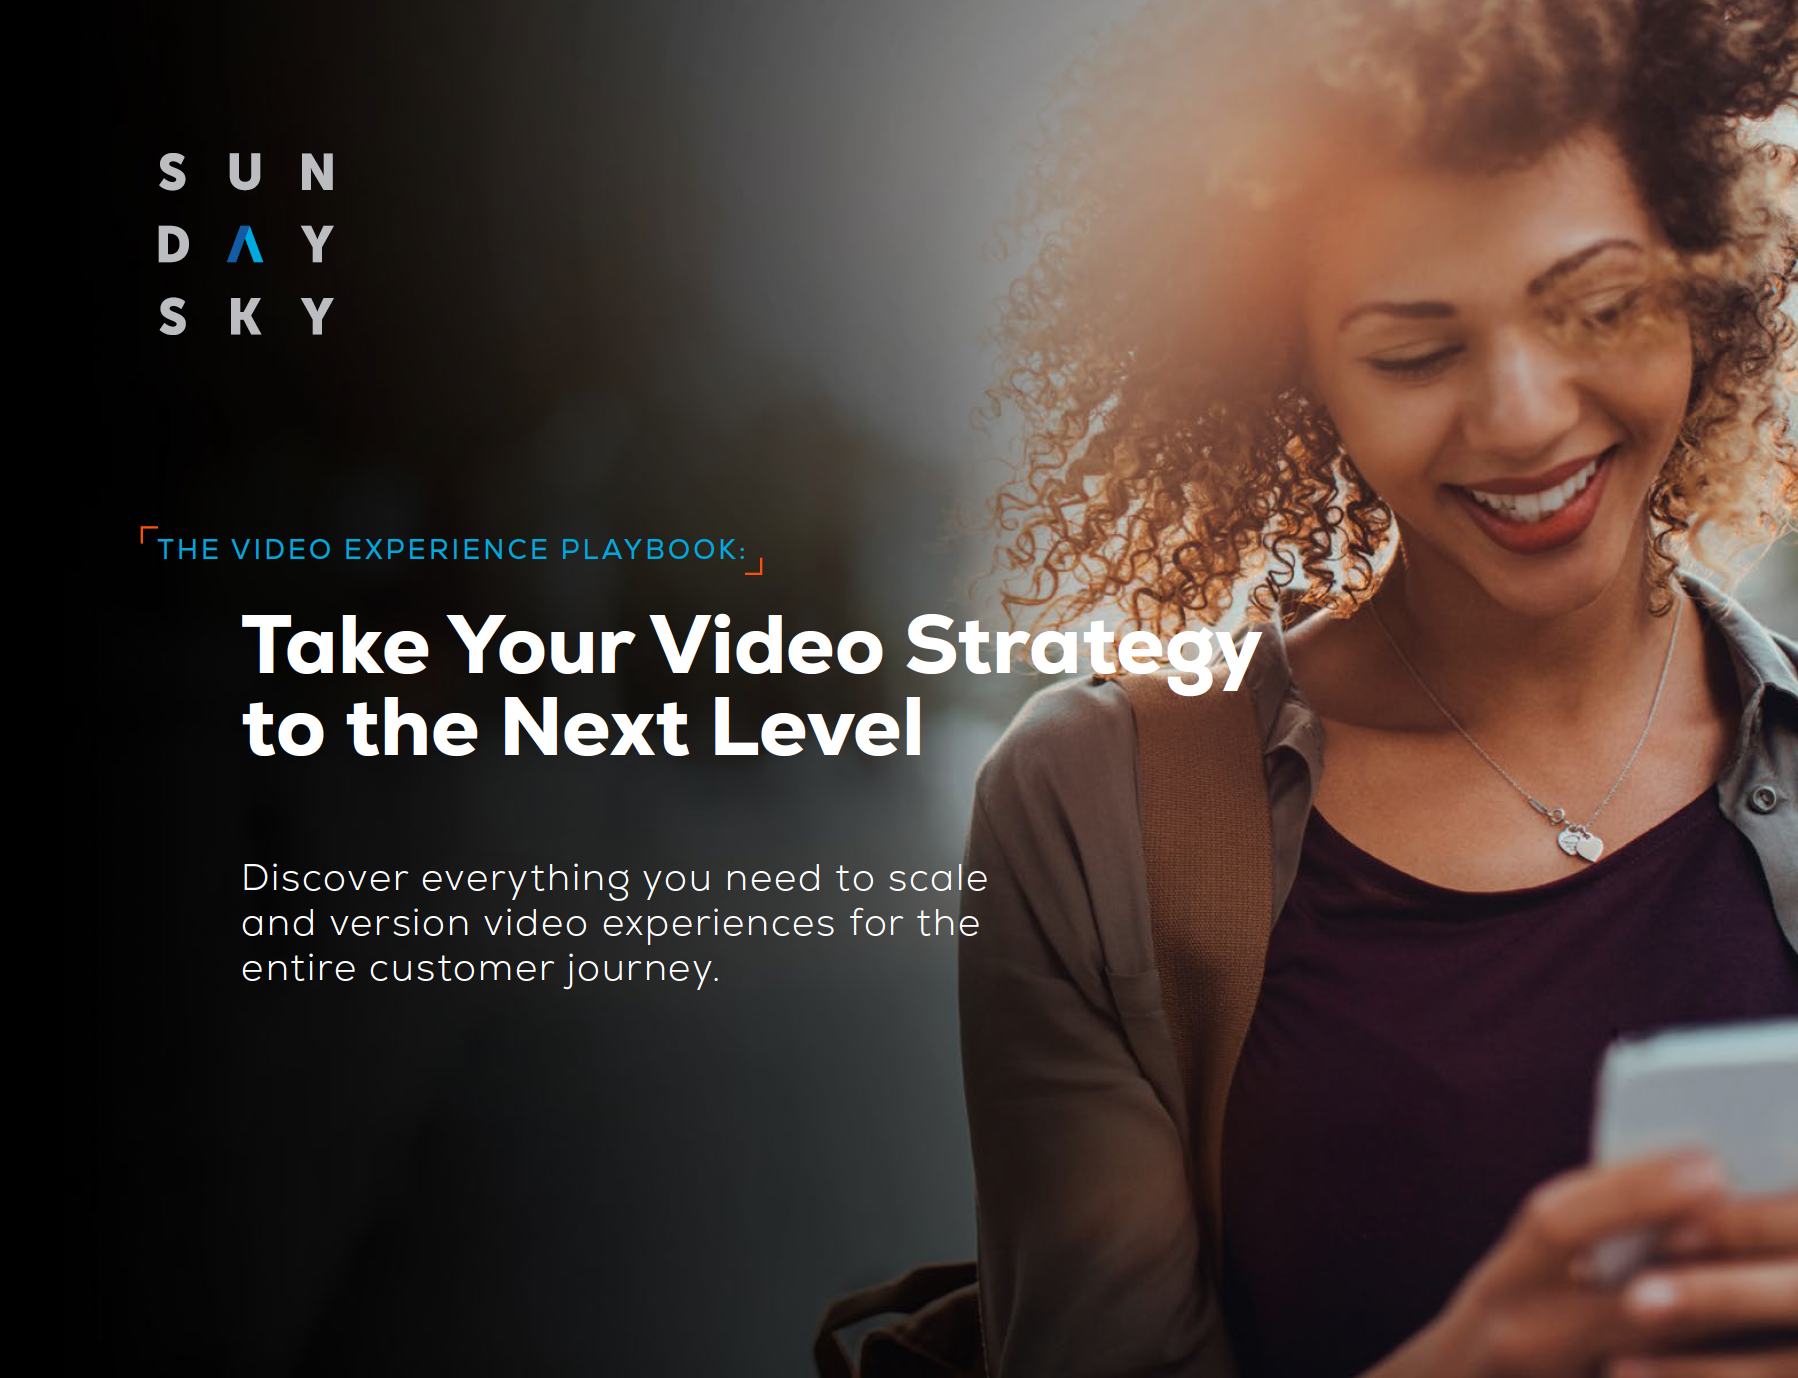 The Video Experience Playbook: Take Your Video Strategy to the Next Level